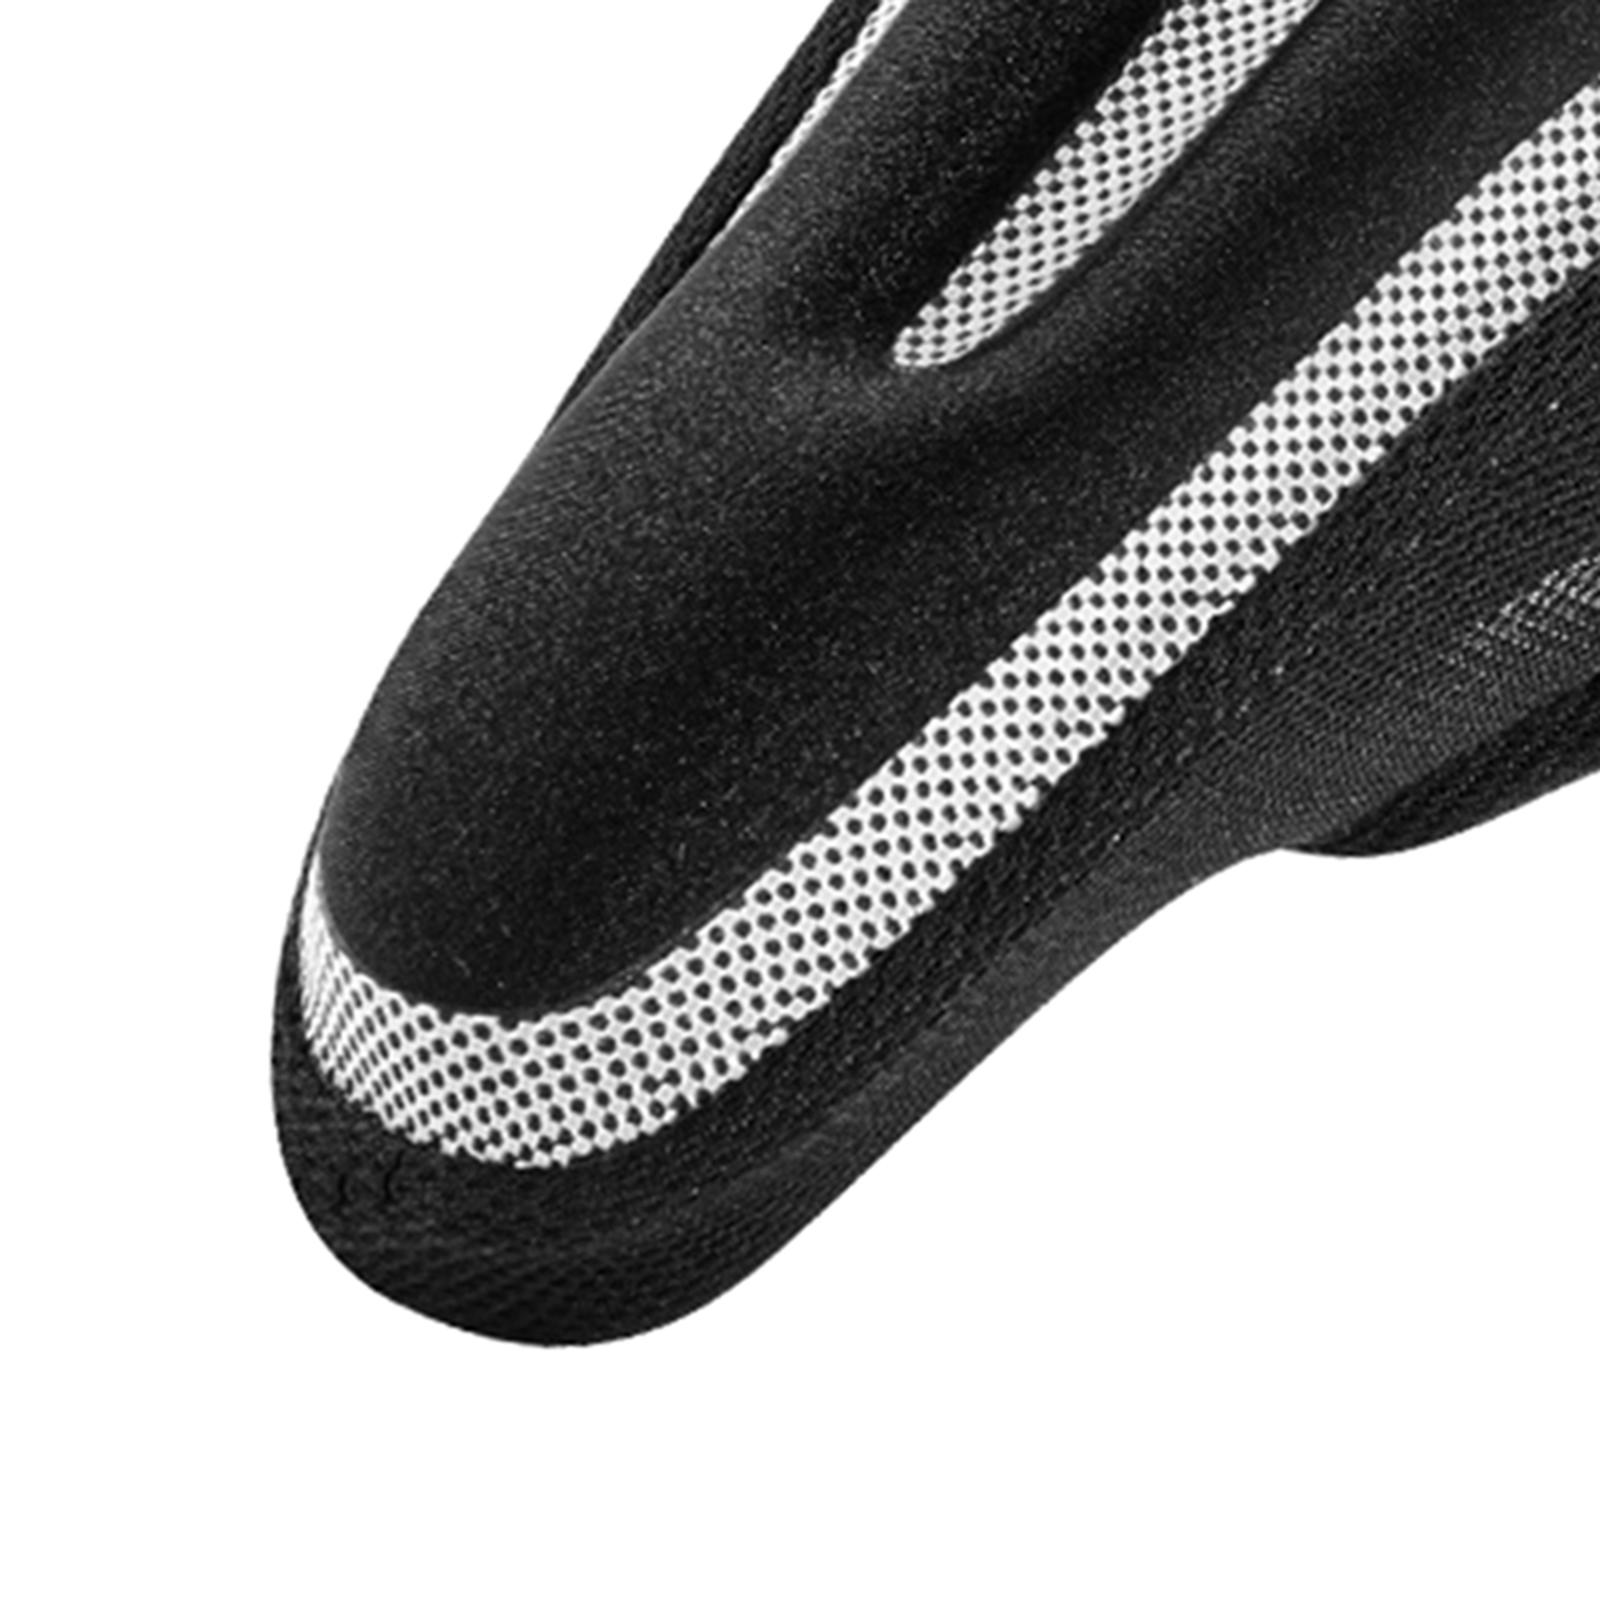 Bike Seat Cover Comfort Padding Soft Silicone Saddle Cushion Accessories Black and Gray